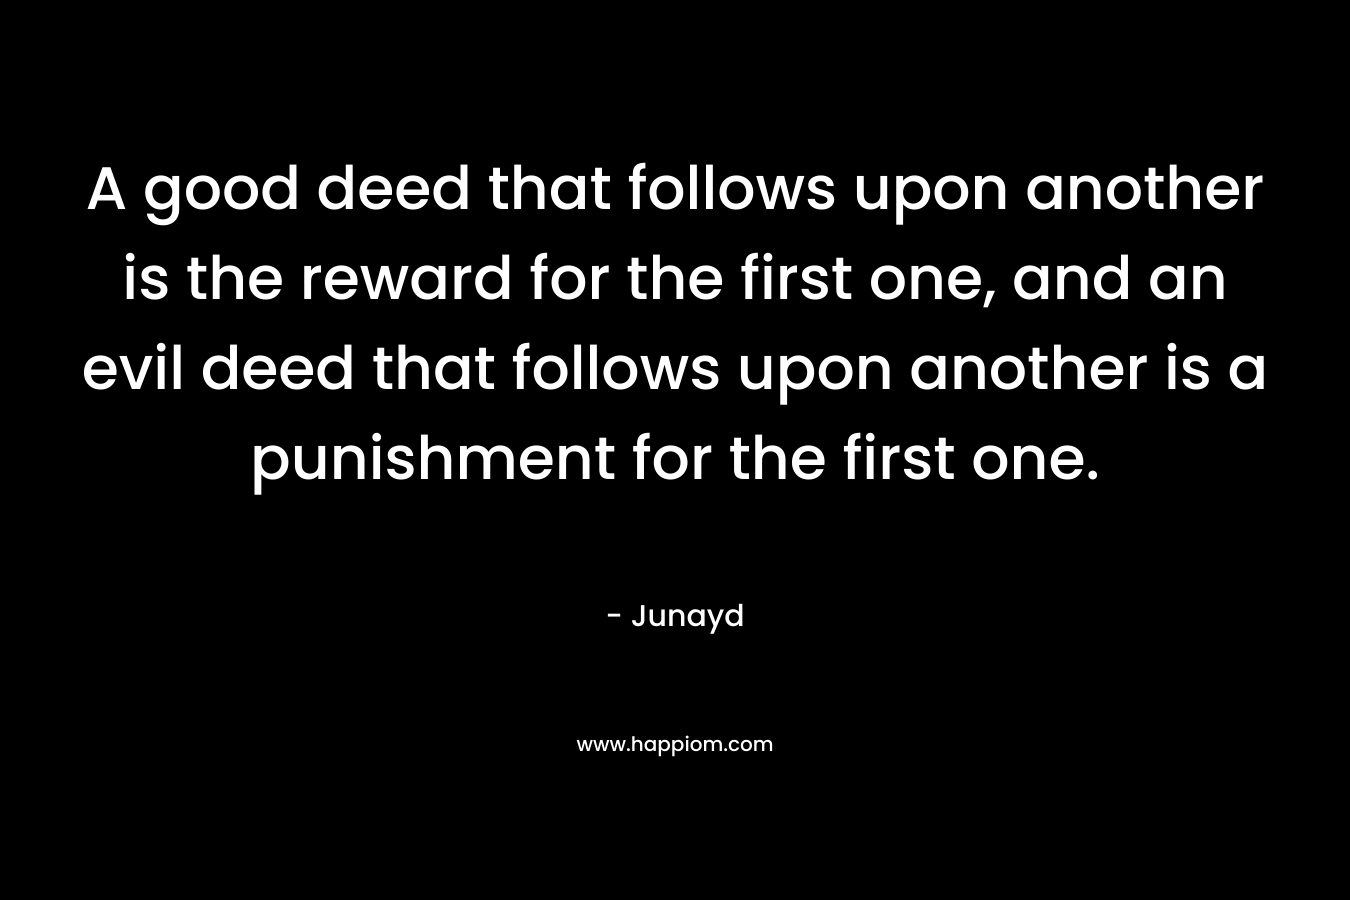 A good deed that follows upon another is the reward for the first one, and an evil deed that follows upon another is a punishment for the first one.